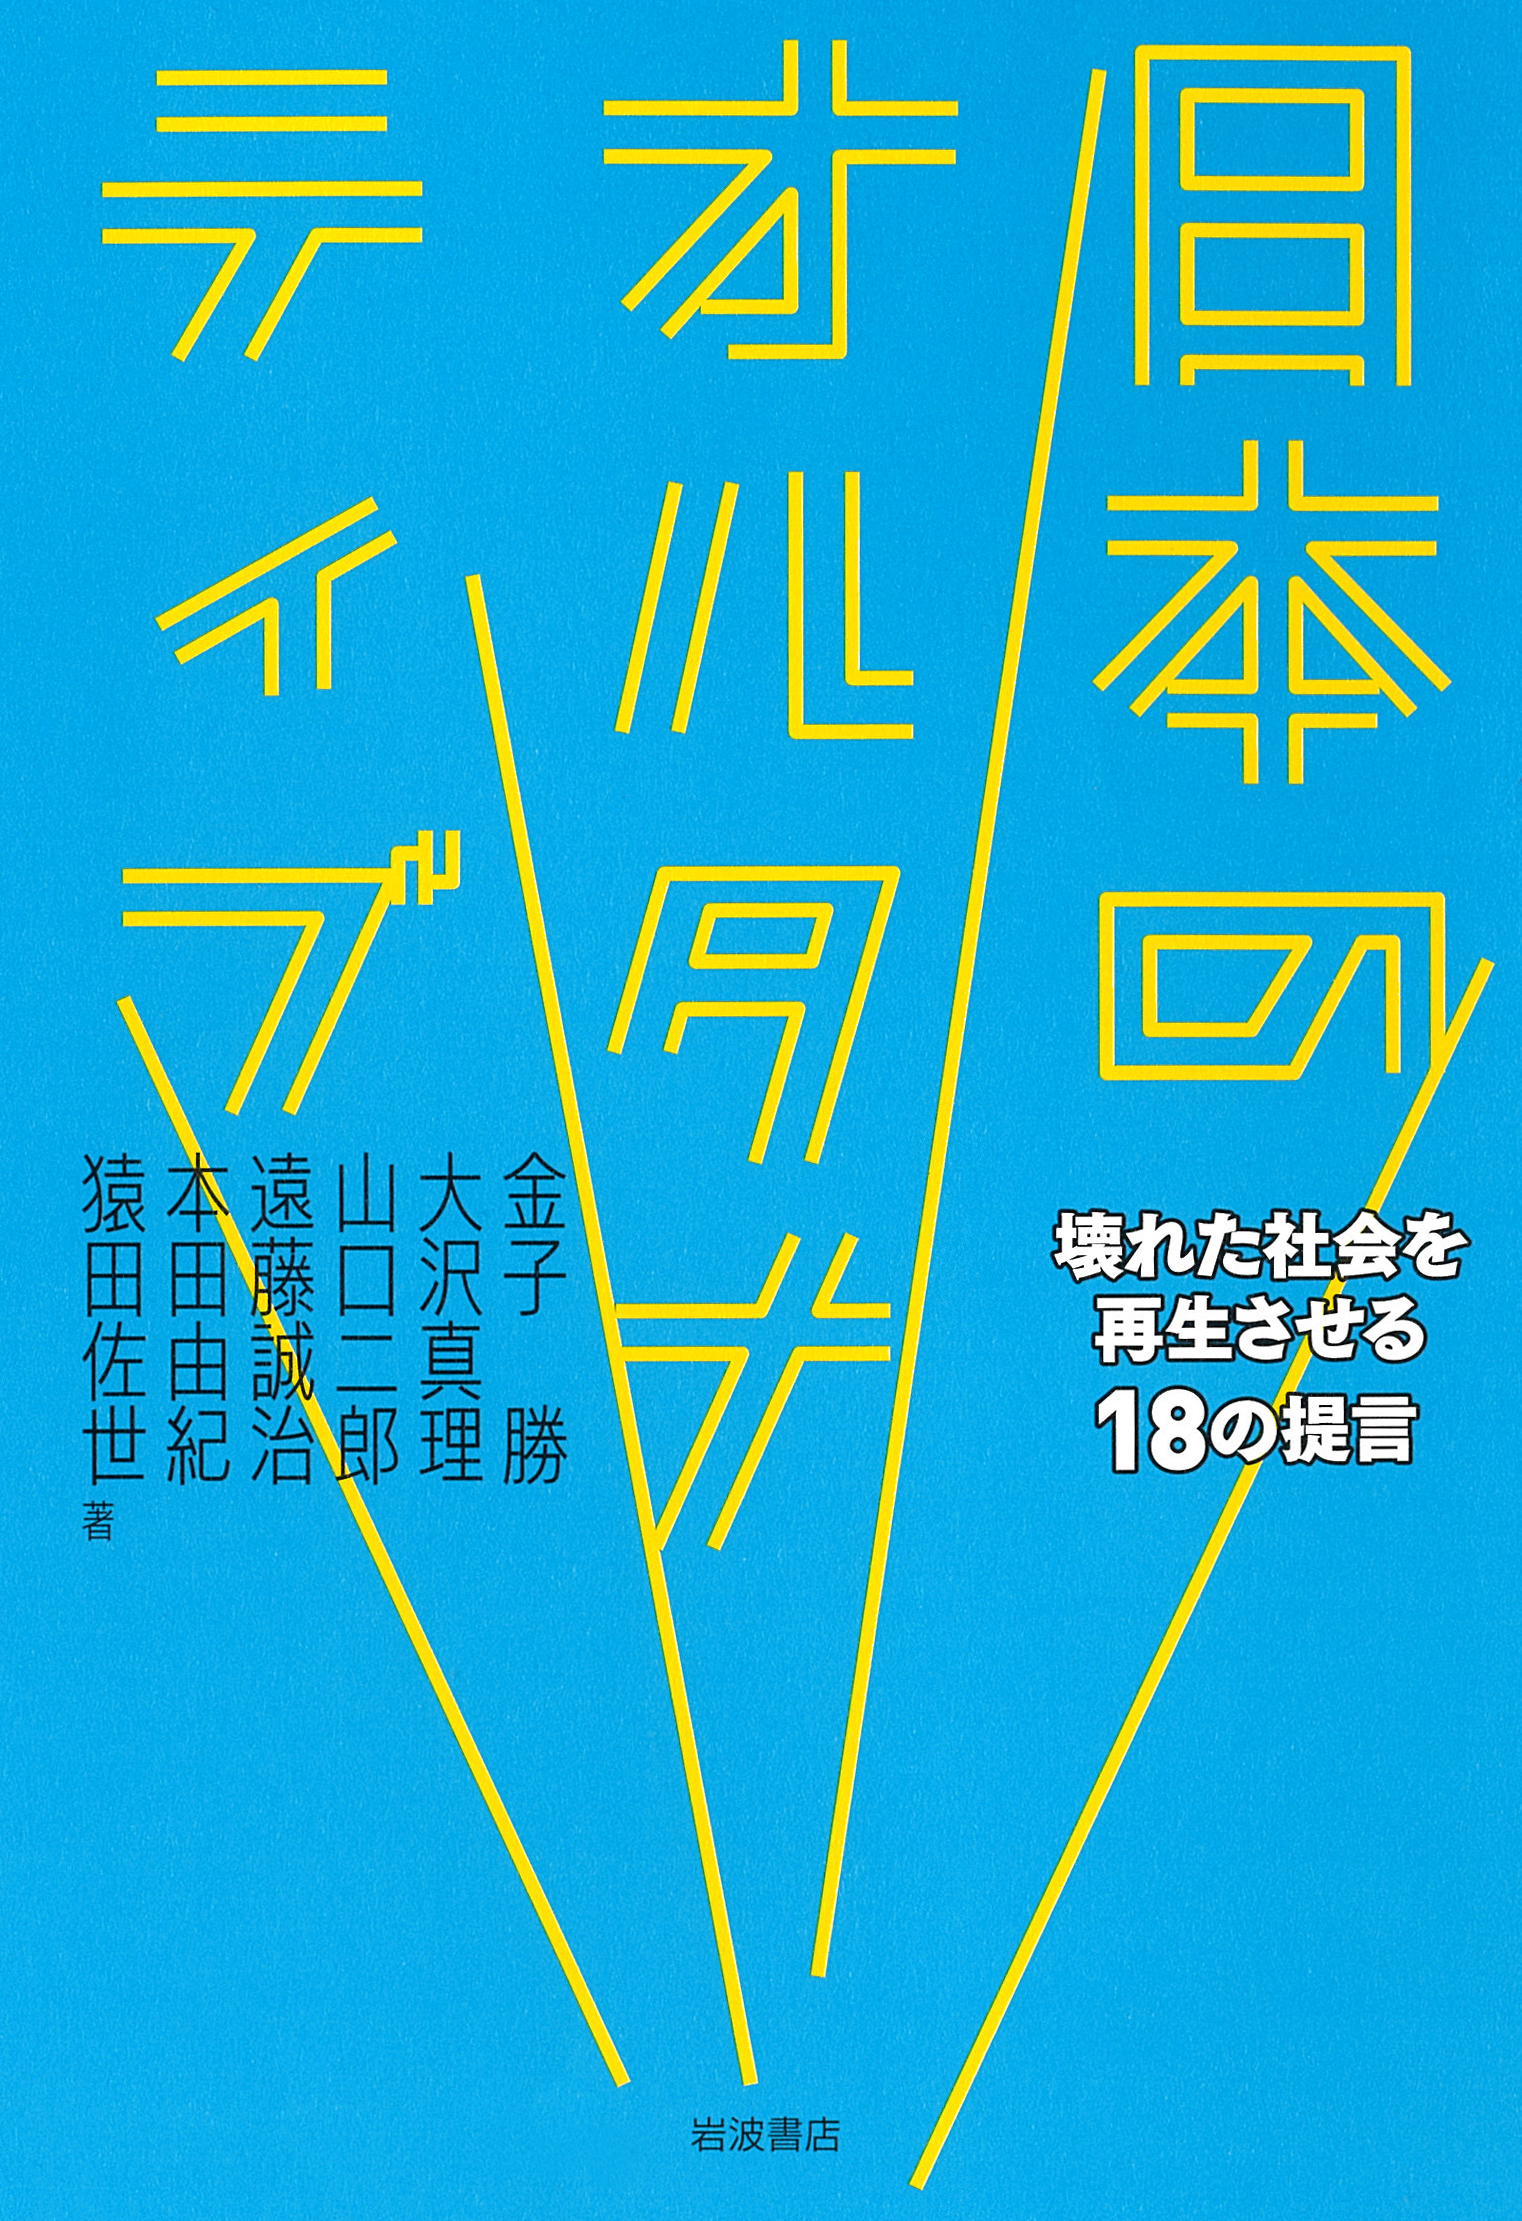 book title in yellow, on a light blue cover